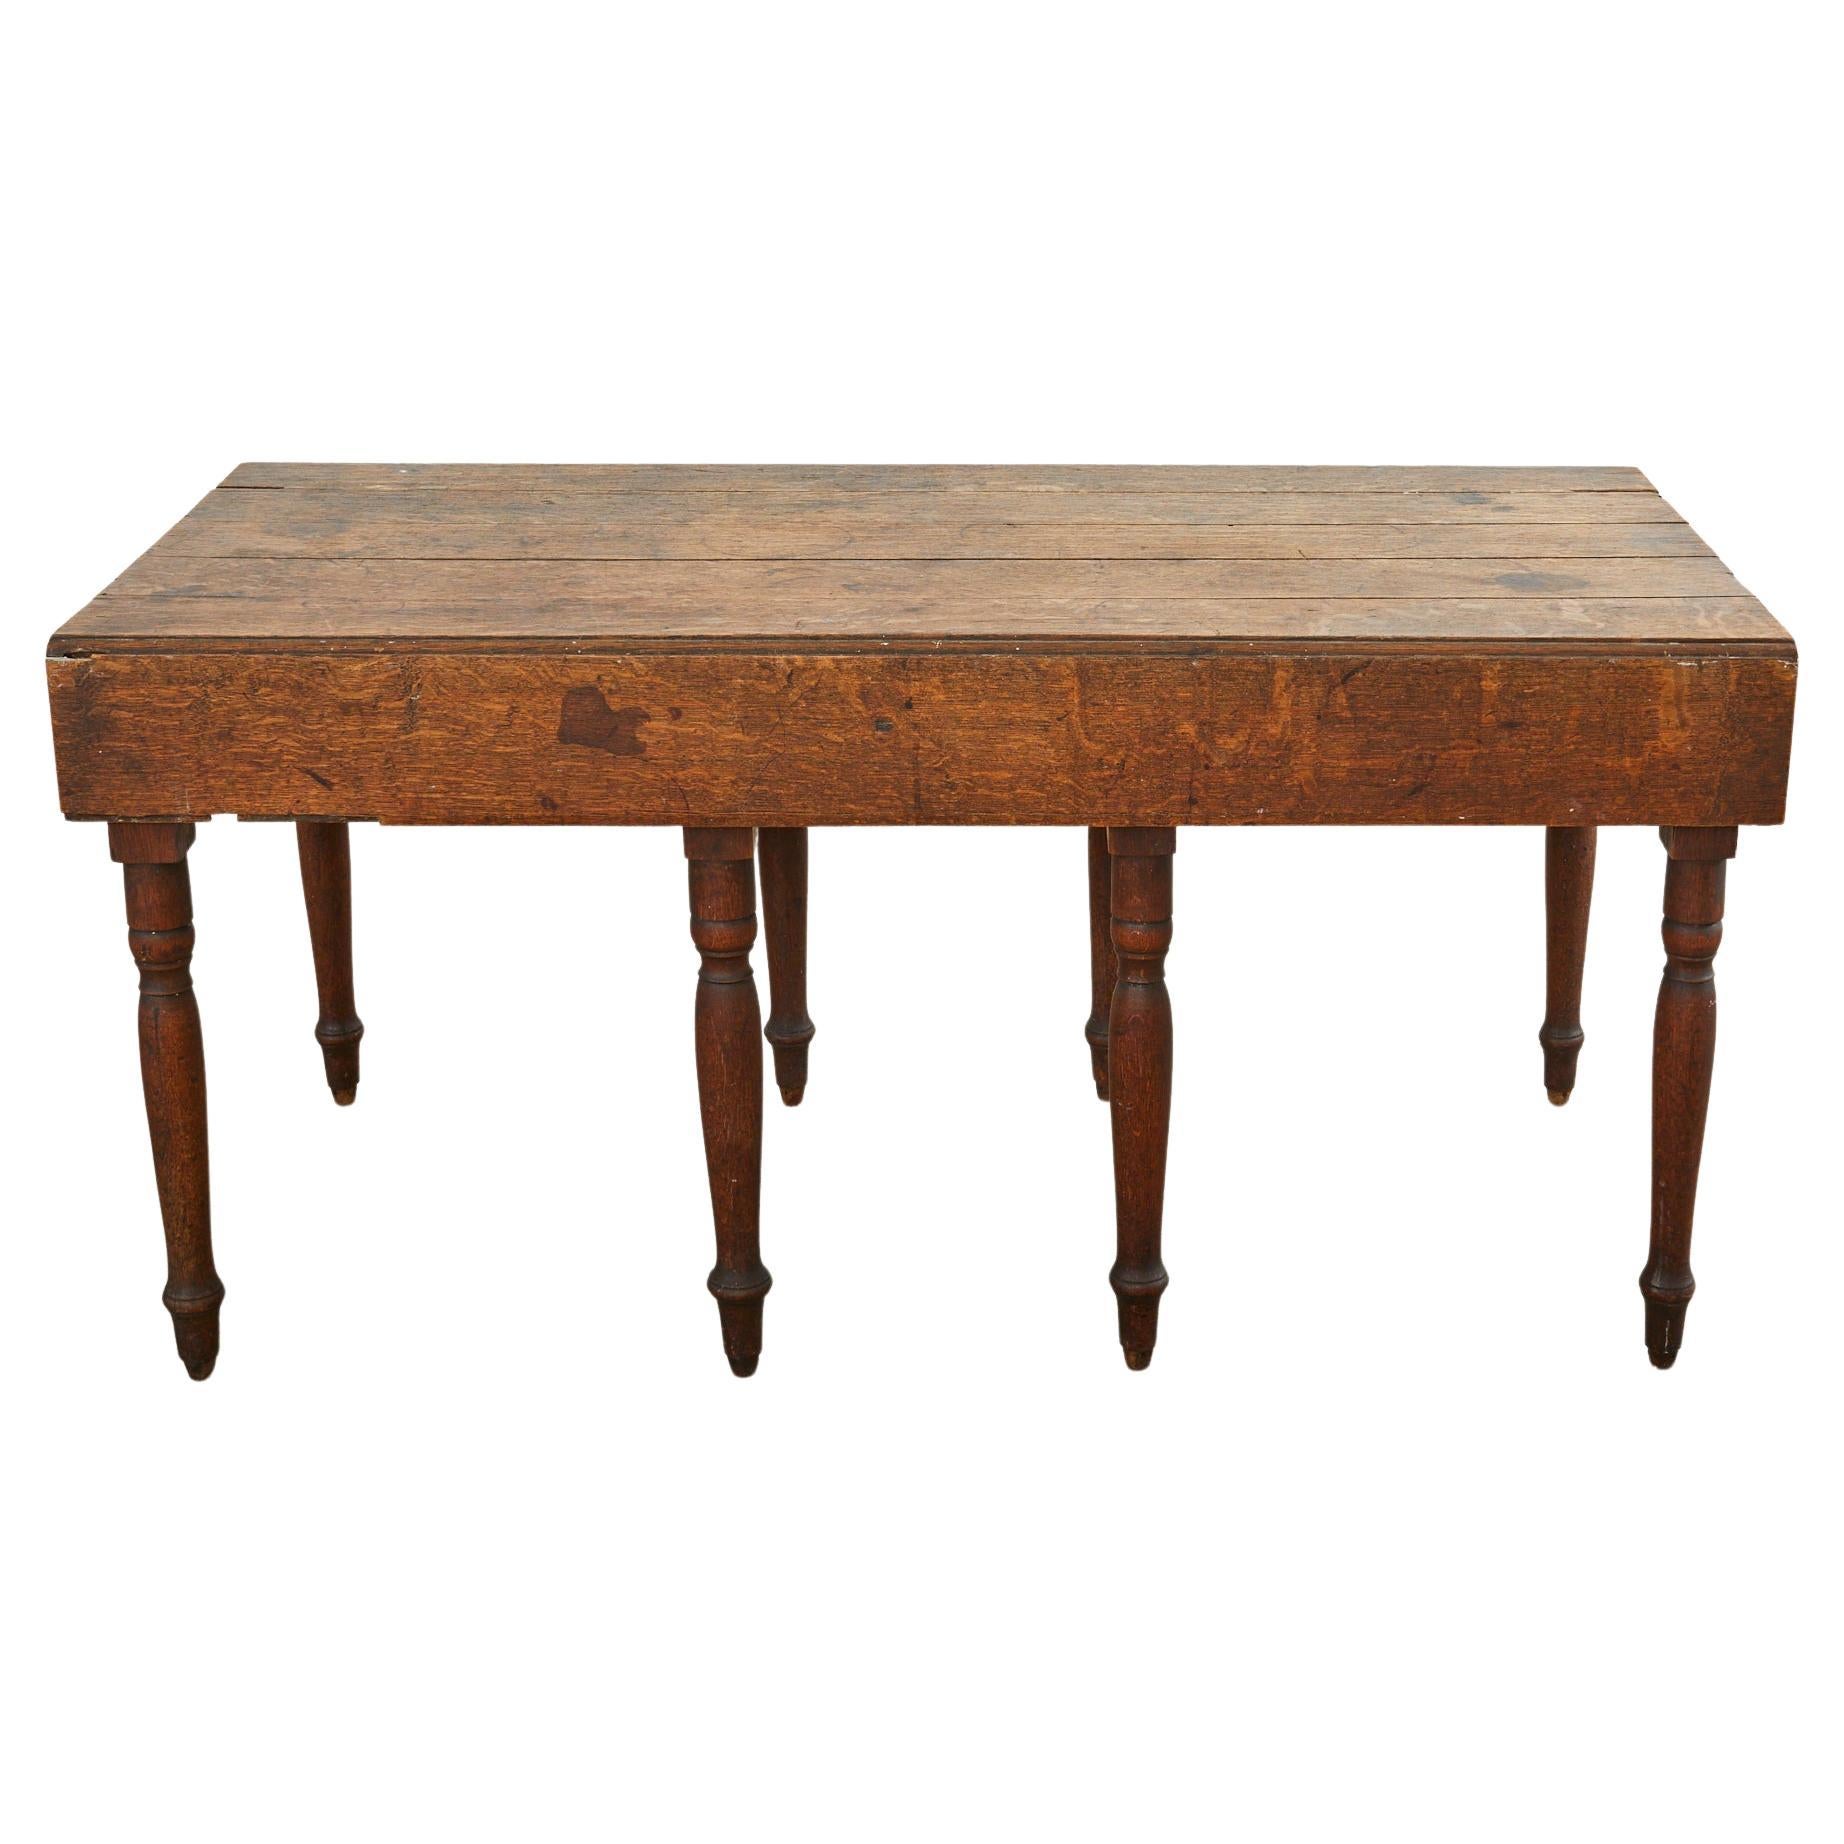 19th Century Country English Oak Drop Leaf Farmhouse Table For Sale